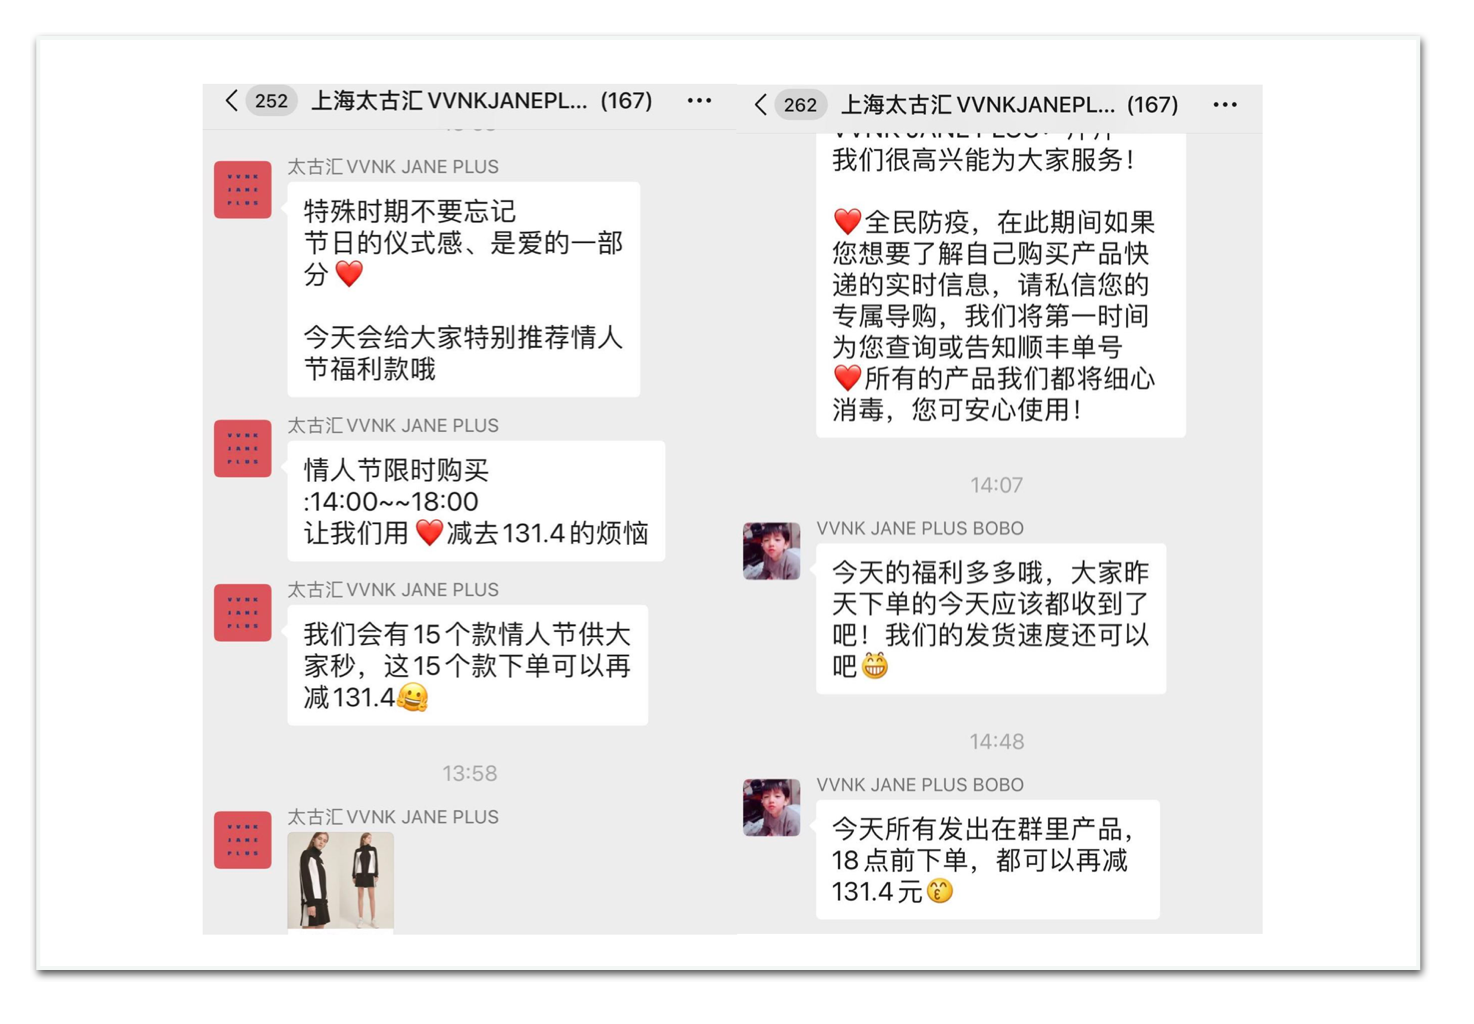 Photo: screenshots of the flash sale WeChat group.